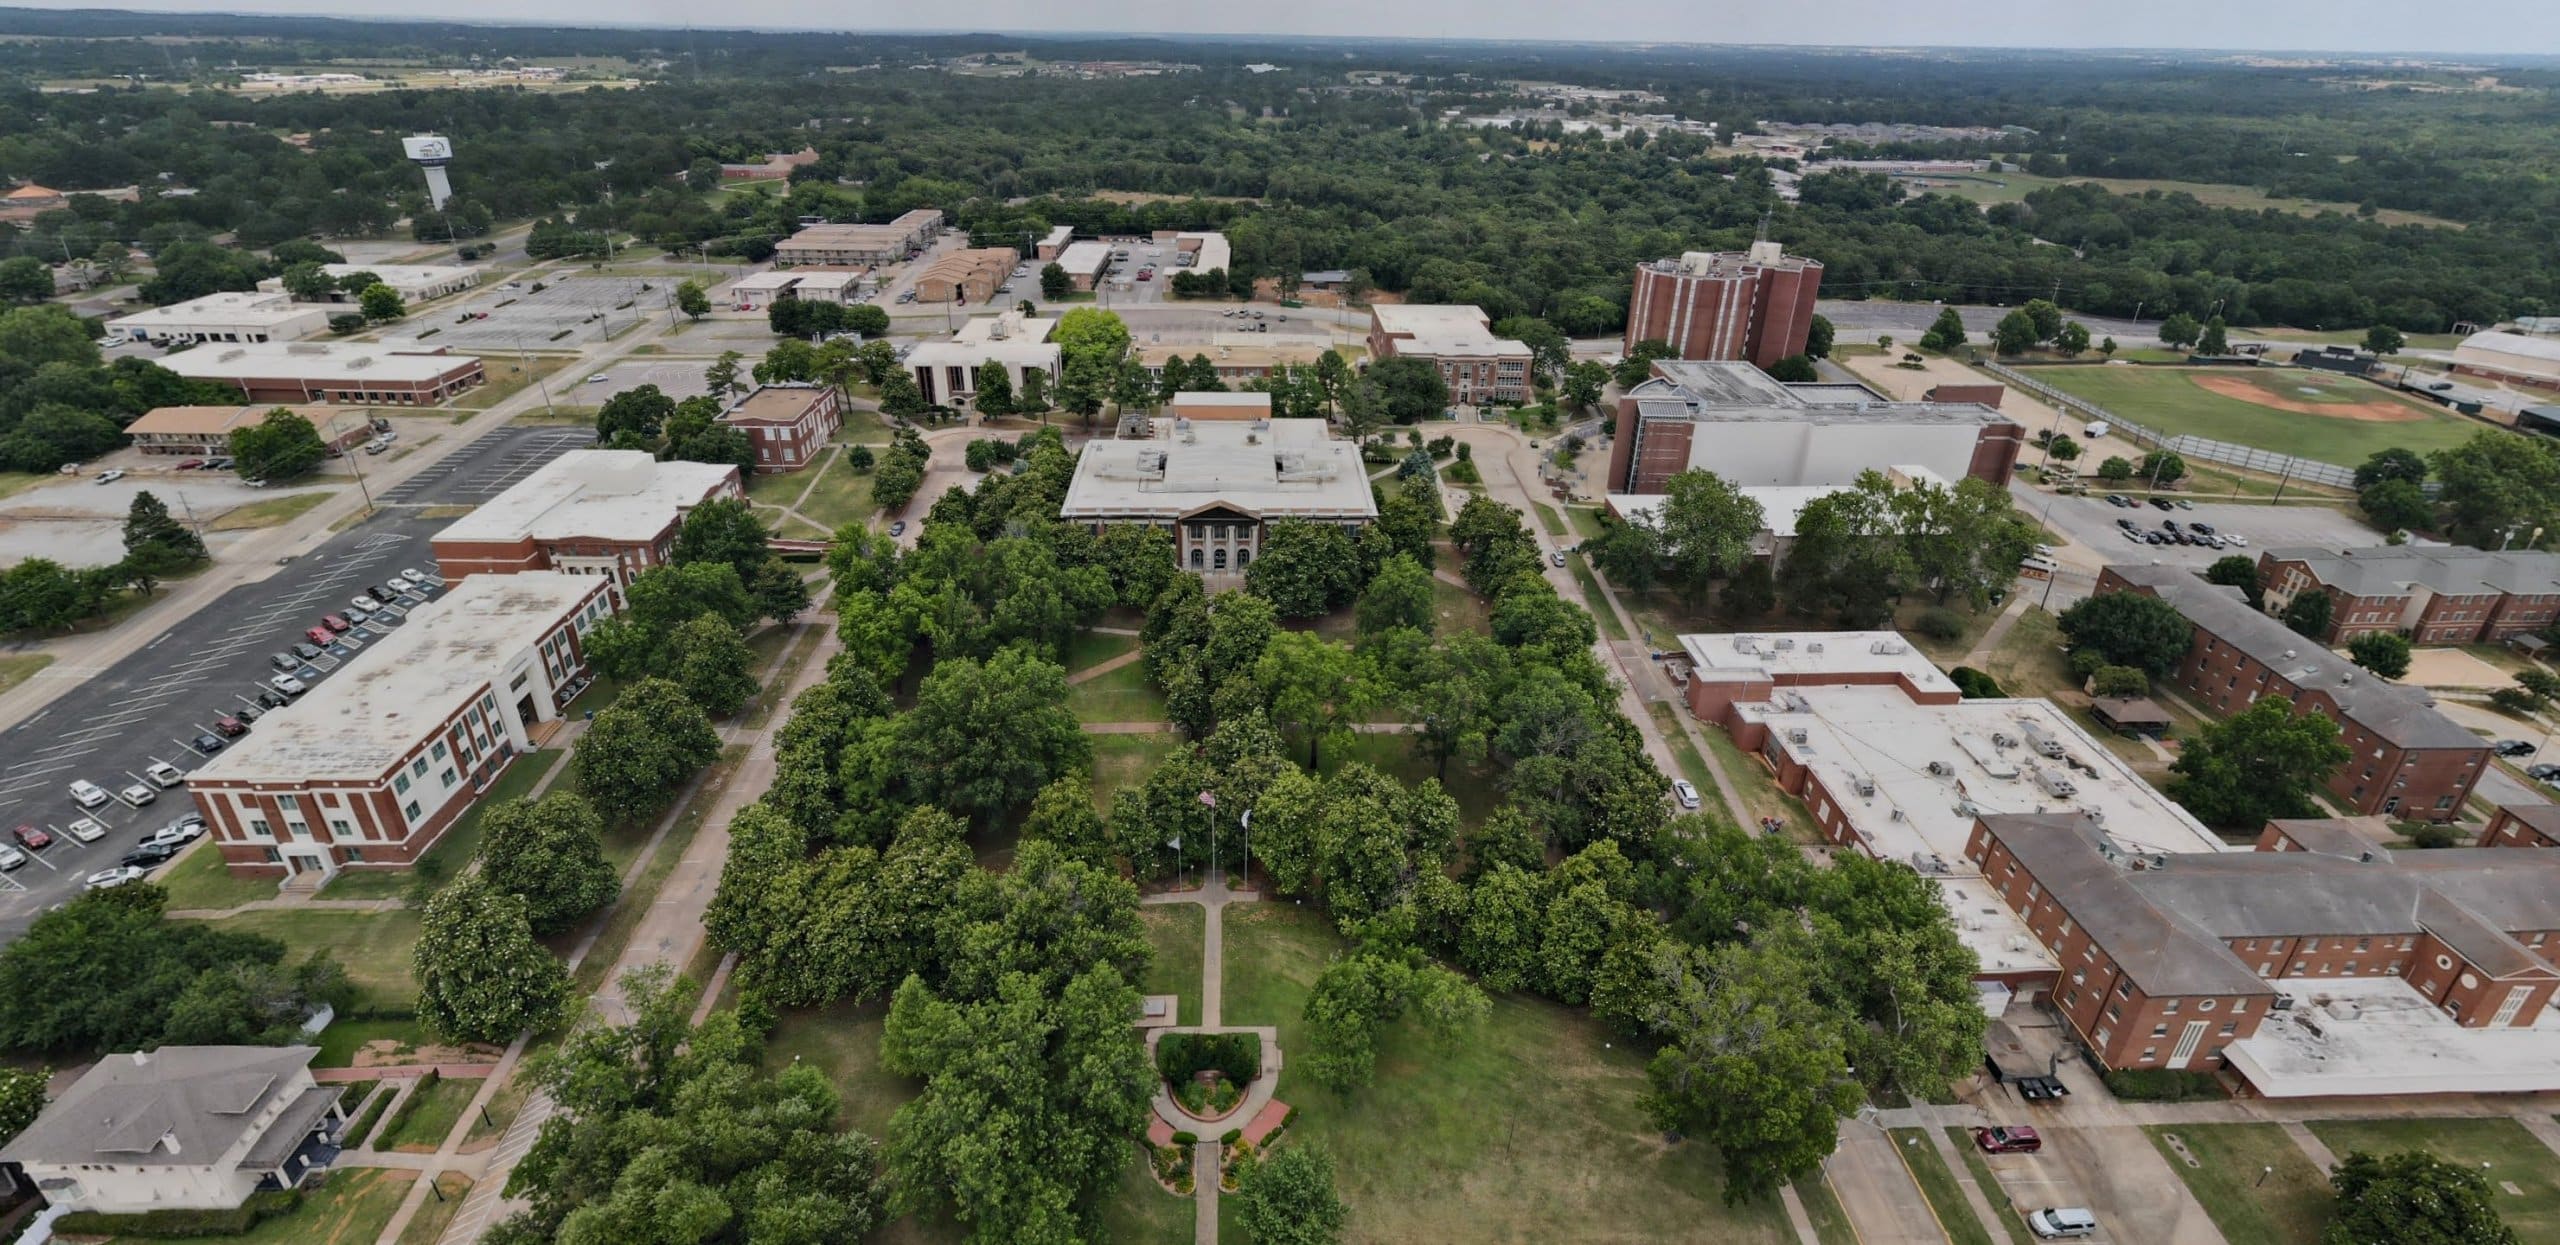 Oklahoma State University Calendar Spring 2022 Spring Break Scheduled For March 15-21 | Southeastern Oklahoma State  University